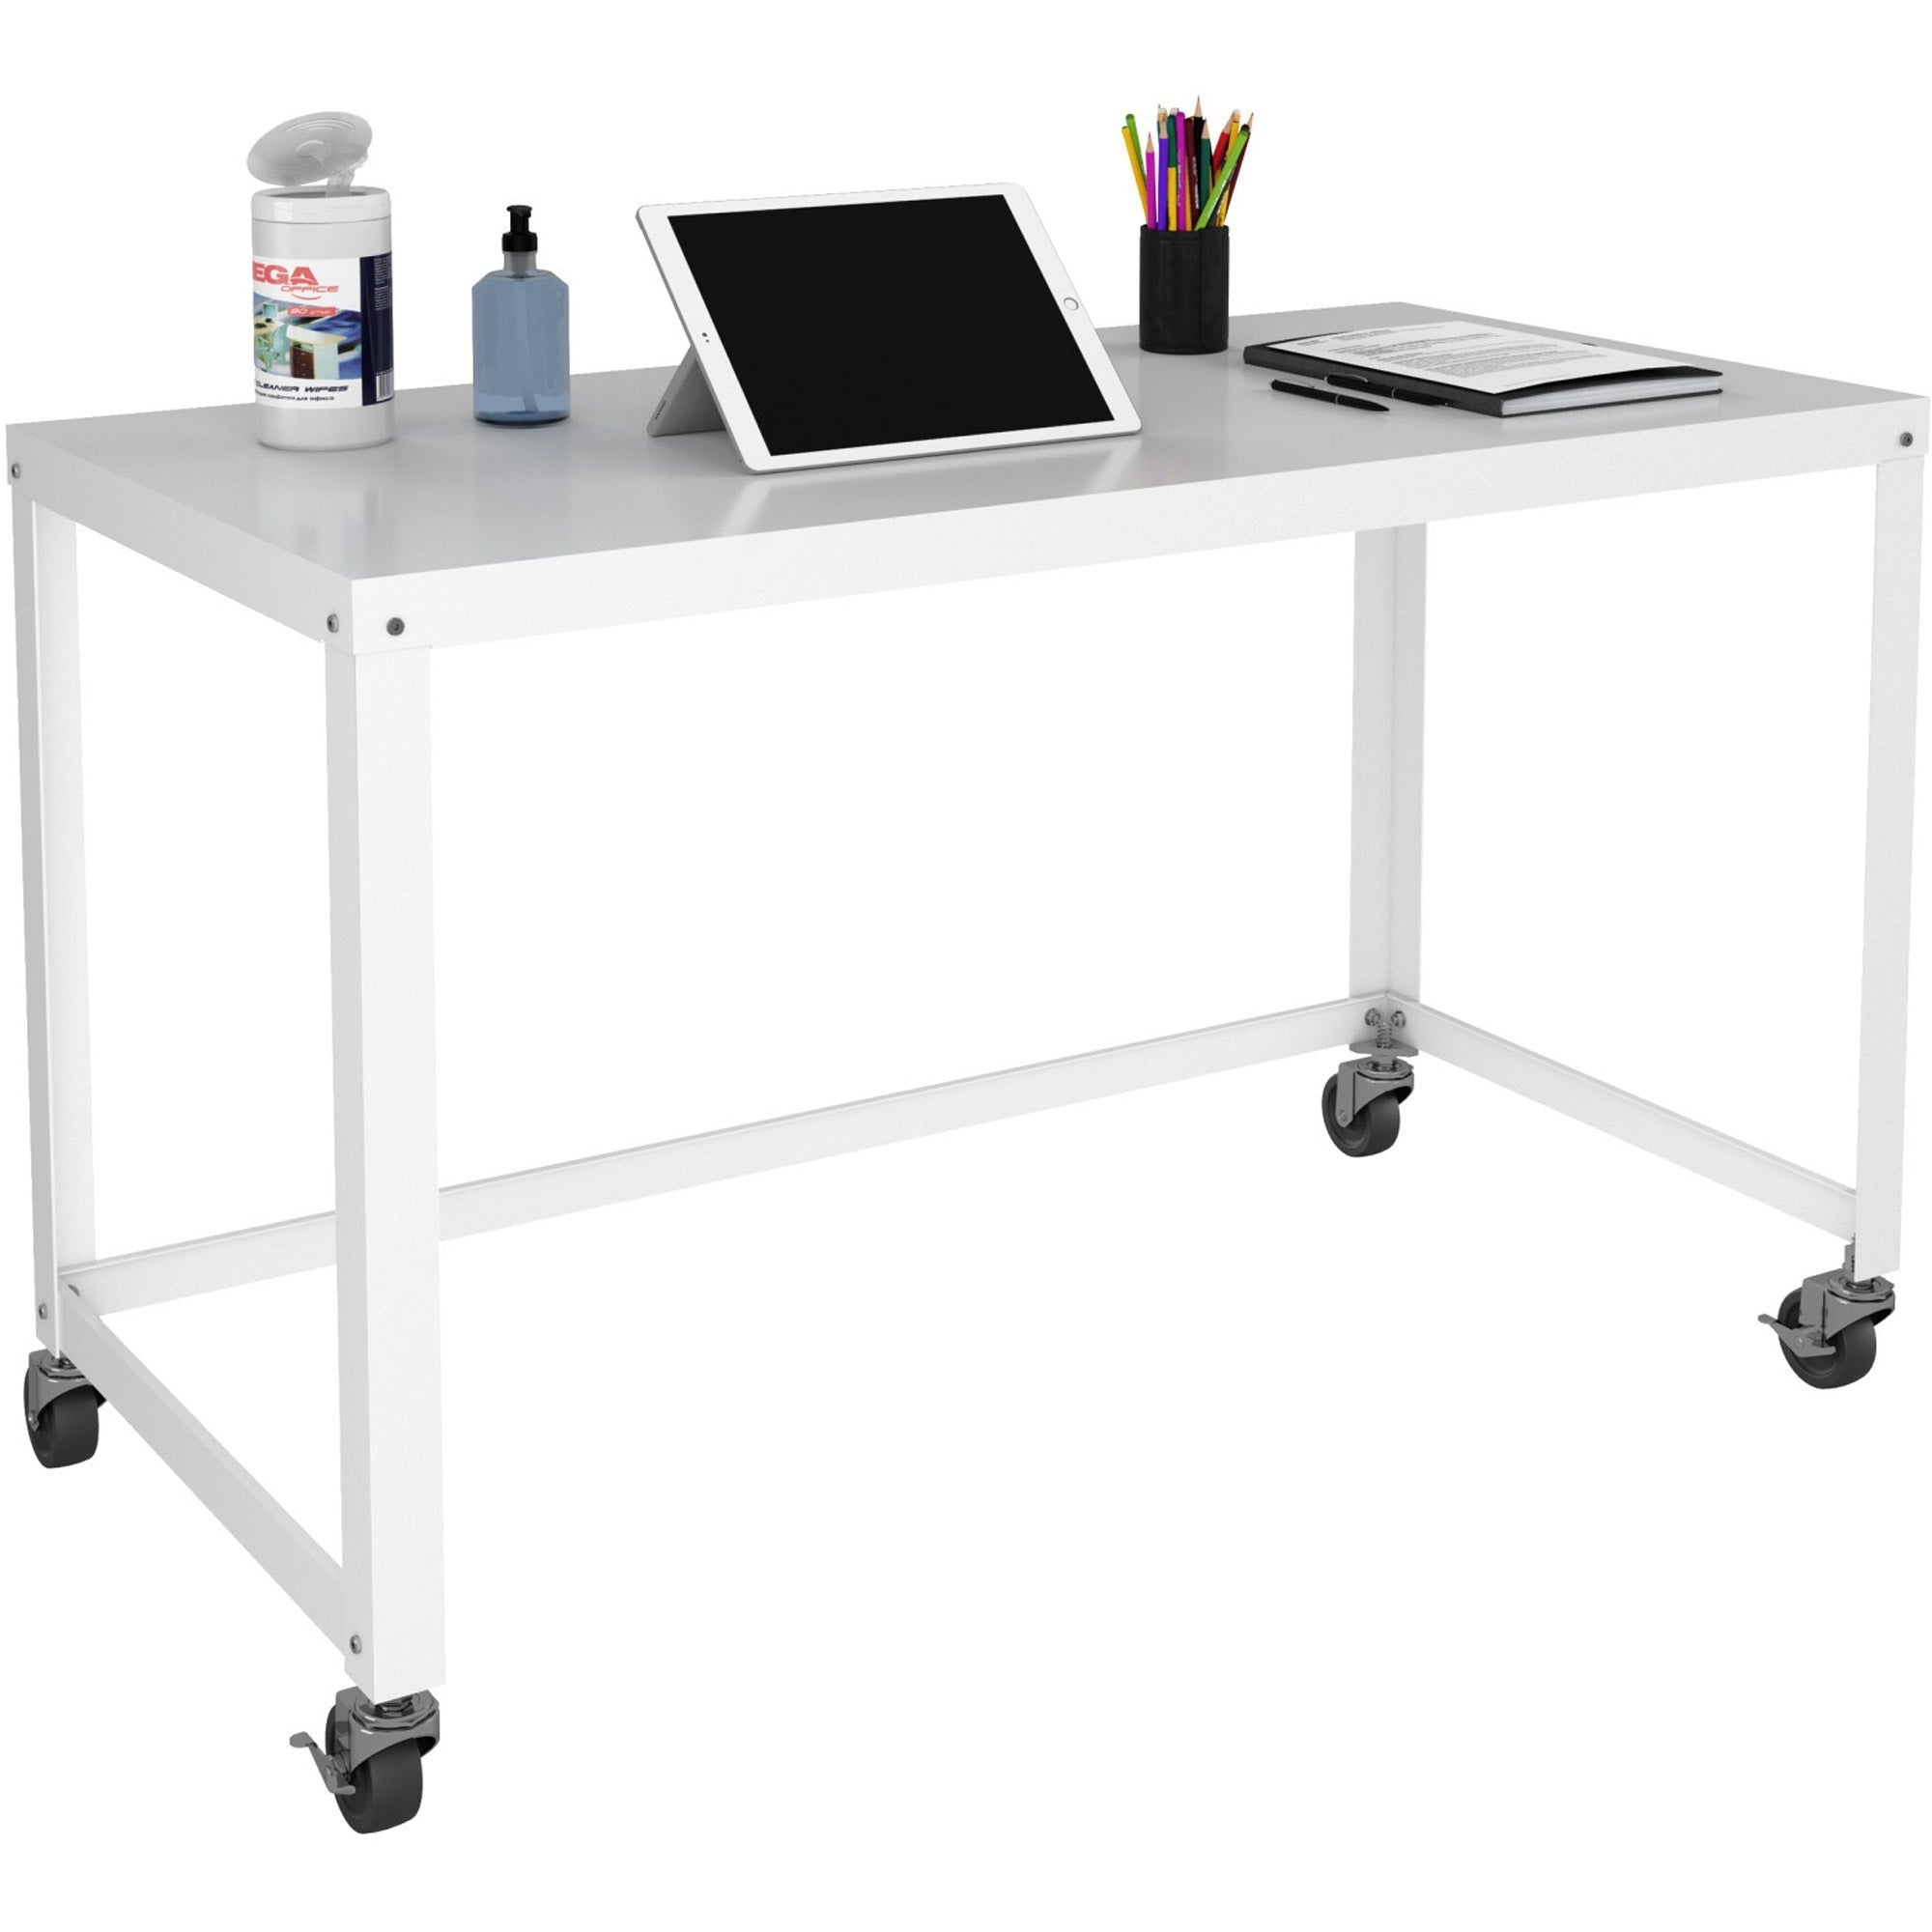 lorell-soho-personal-mobile-desk-for-table-toprectangle-top-x-48-table-top-width-x-23-table-top-depth-2950-height-assembly-required-white-1-each_llr34418 - 4